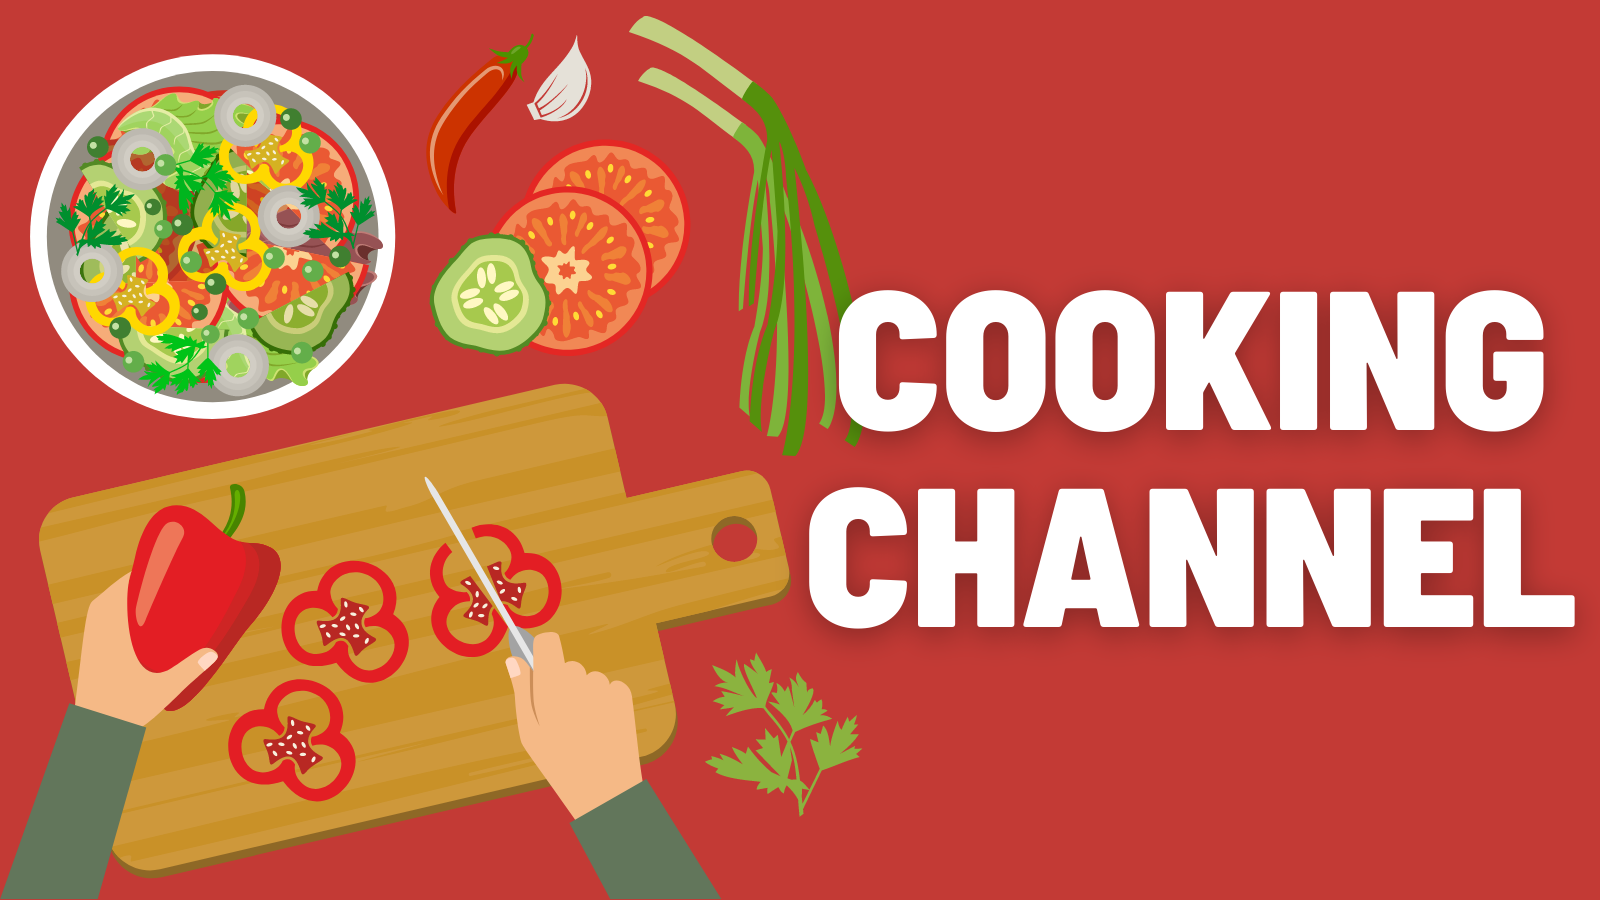 Click here to view the cooking activities